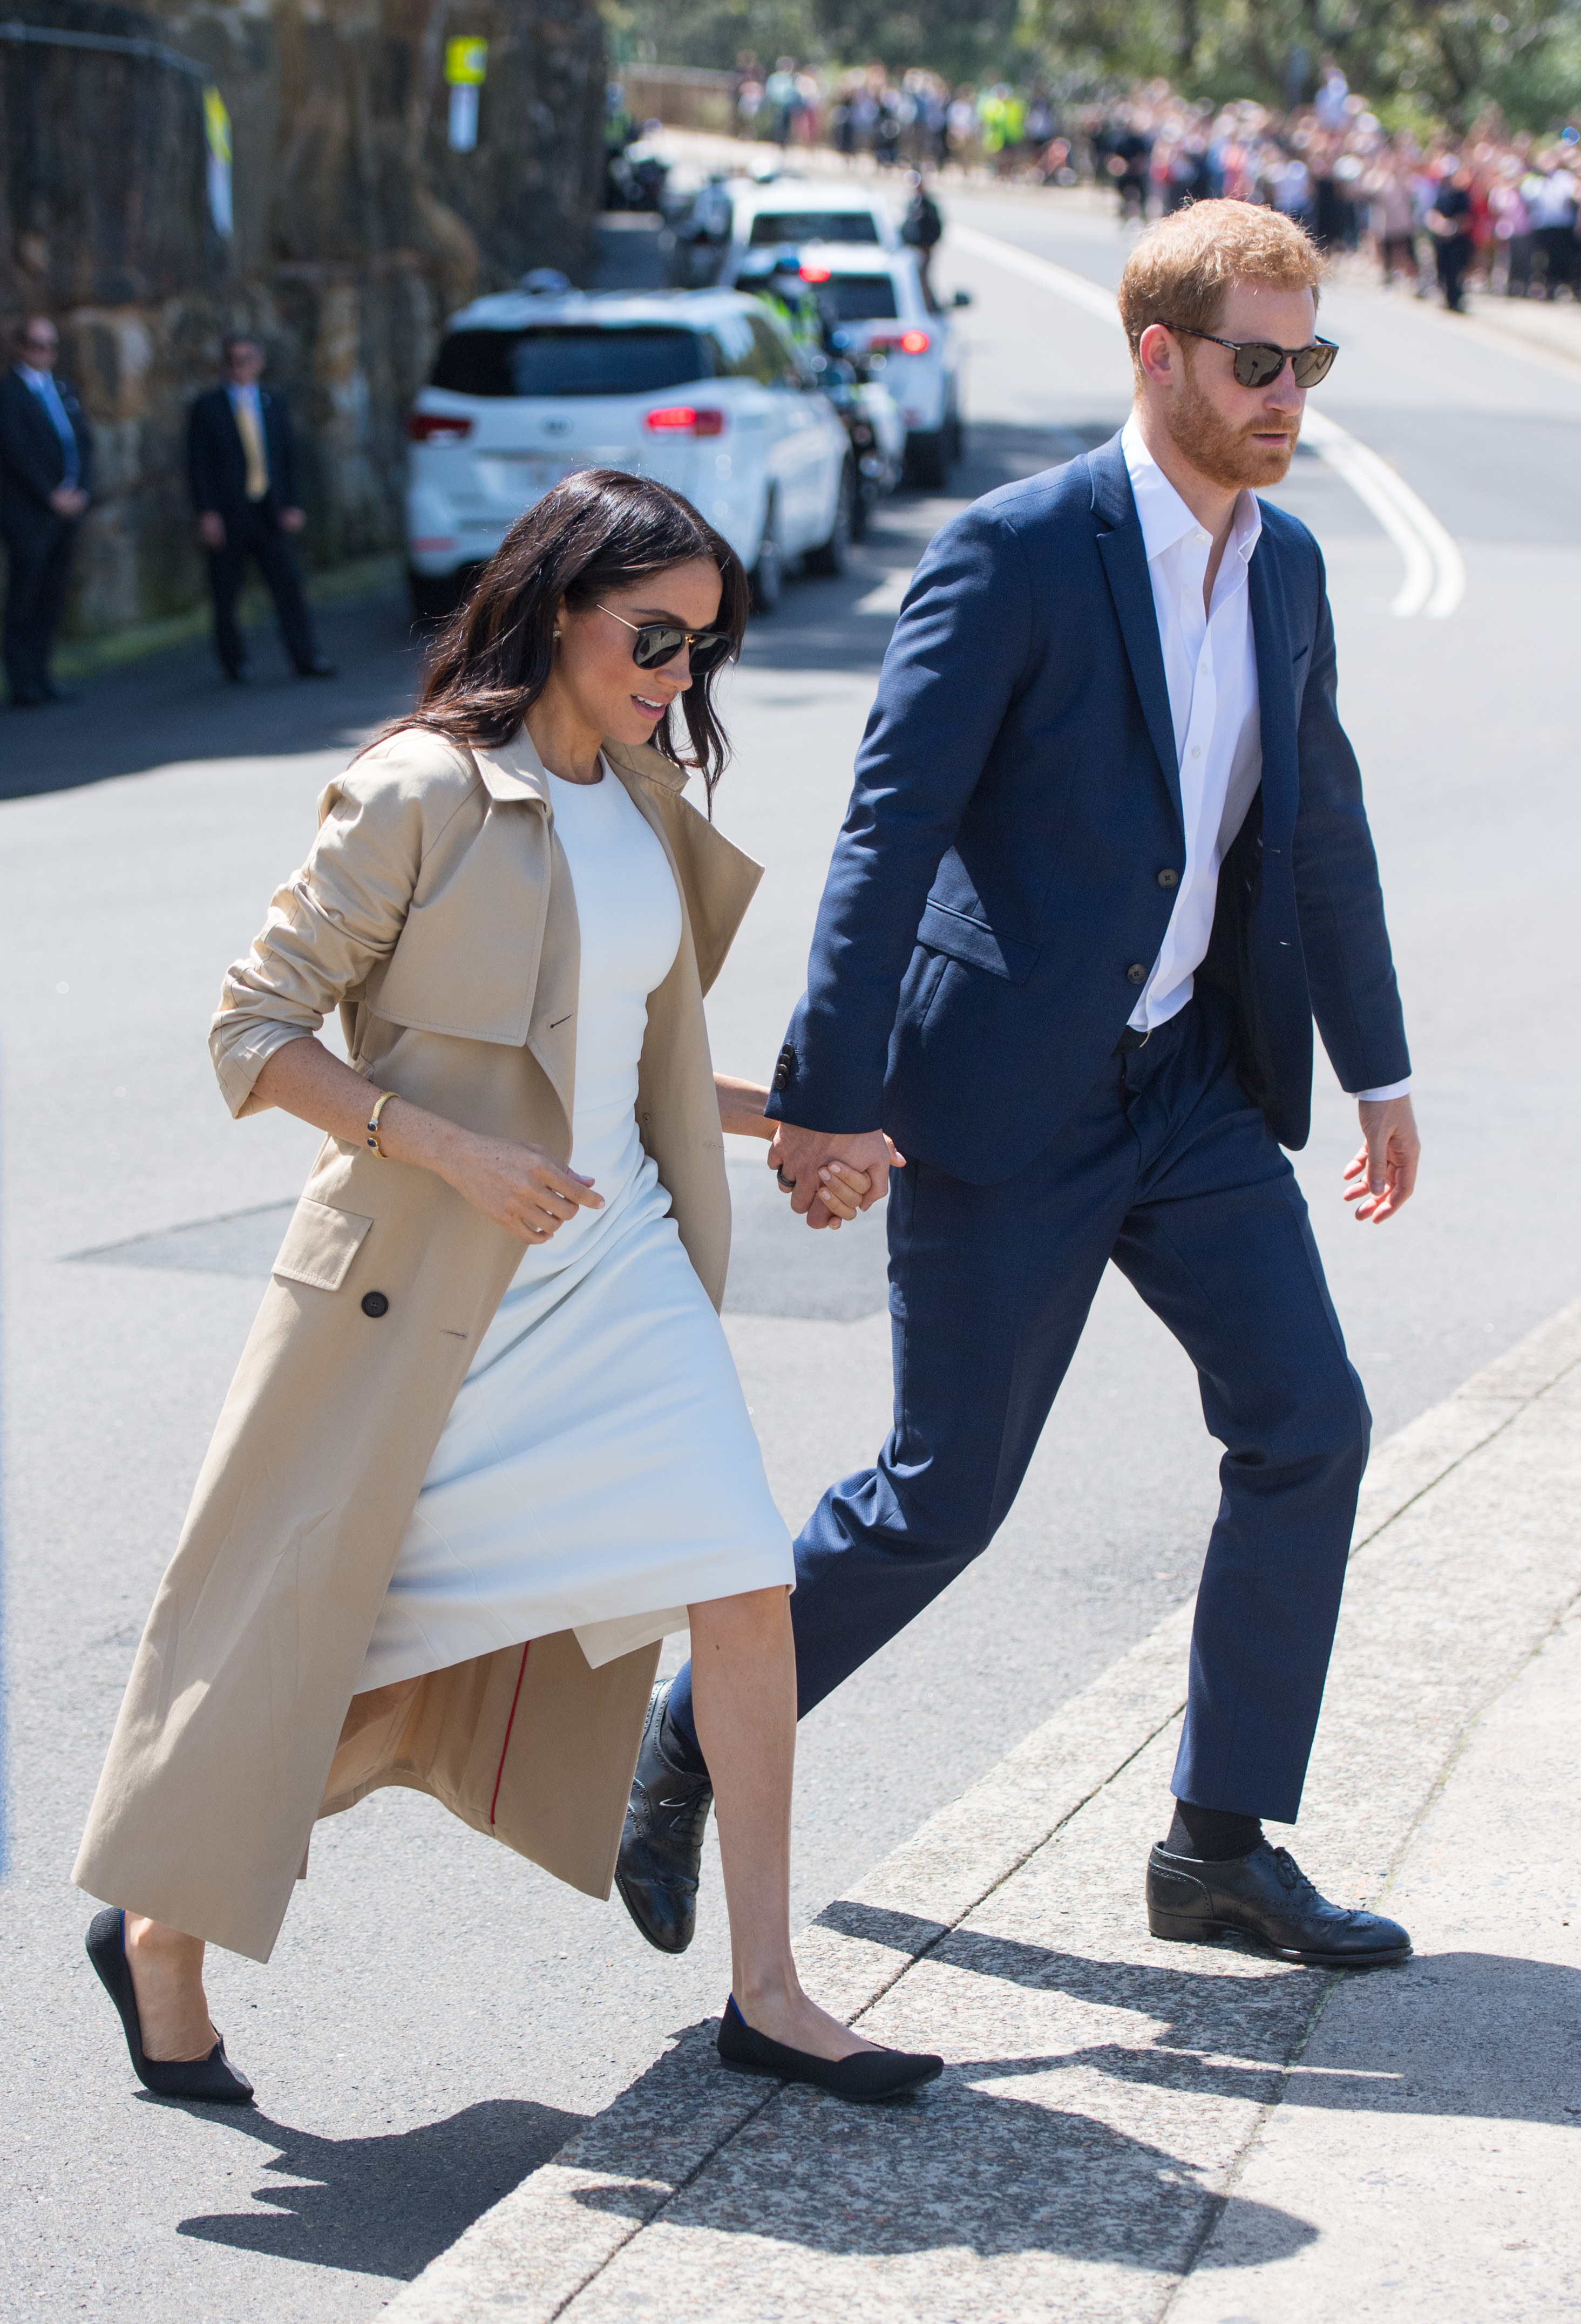 SYDNEY, AUSTRALIA - OCTOBER 16: Prince Harry, Duke of Sussex and Meghan, Duchess of Sussex depart after visiting Taronga Zoo on October 16, 2018 in Sydney, Australia. The Duke and Duchess of Sussex are on their official 16-day Autumn tour visiting cities in Australia, Fiji, Tonga and New Zealand. (Photo by Dominic Lipinski - Pool/Getty Images)